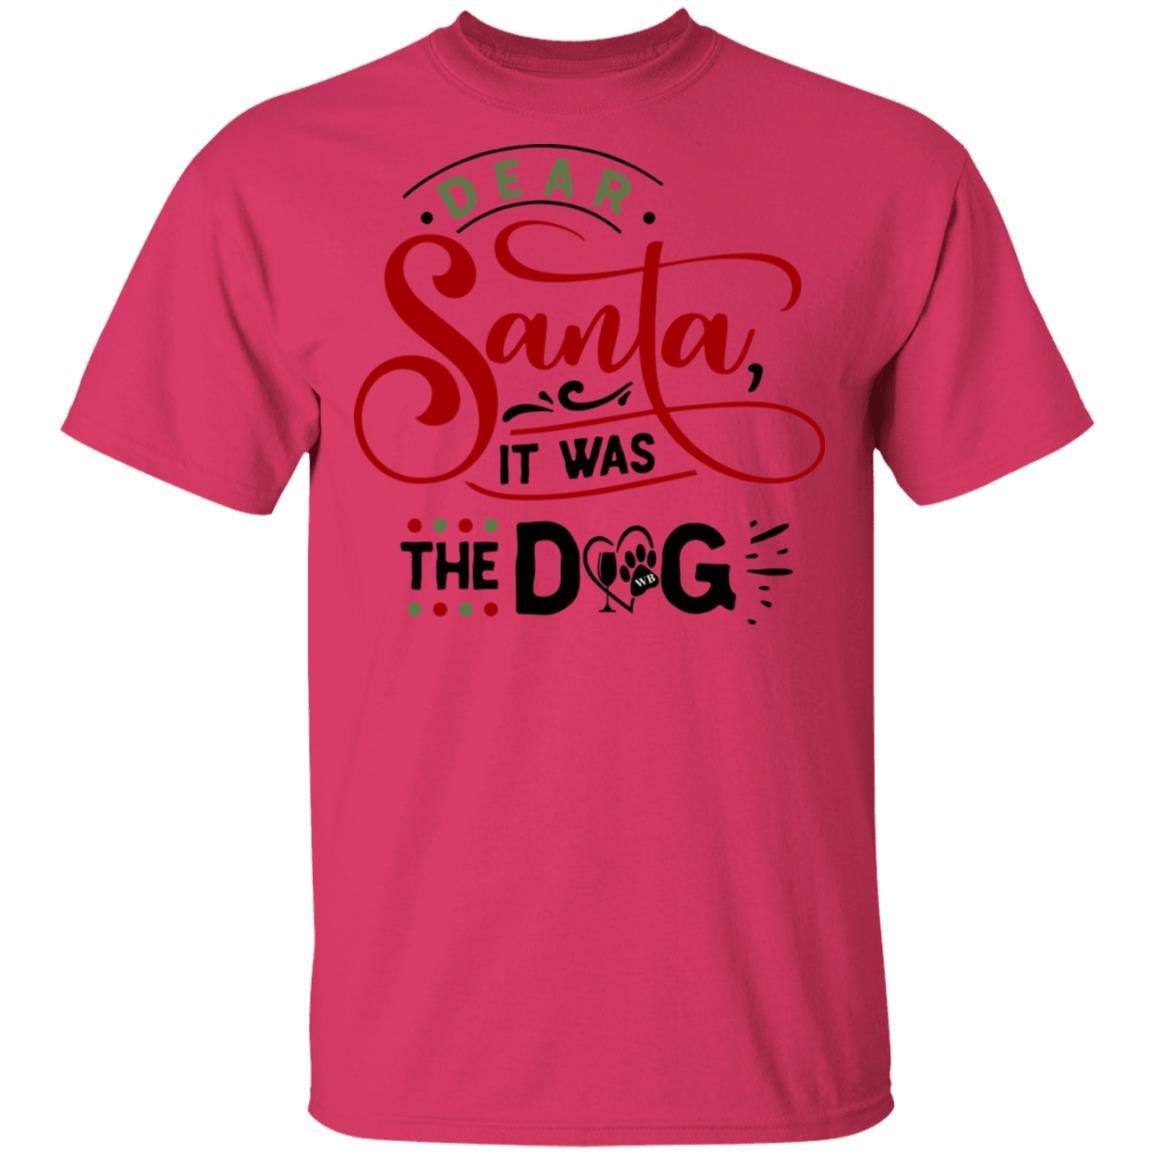 T-Shirts Heliconia / S WineyBitches.Co "Dear Santa It Was The Dog" 5.3 oz. T-Shirt WineyBitchesCo